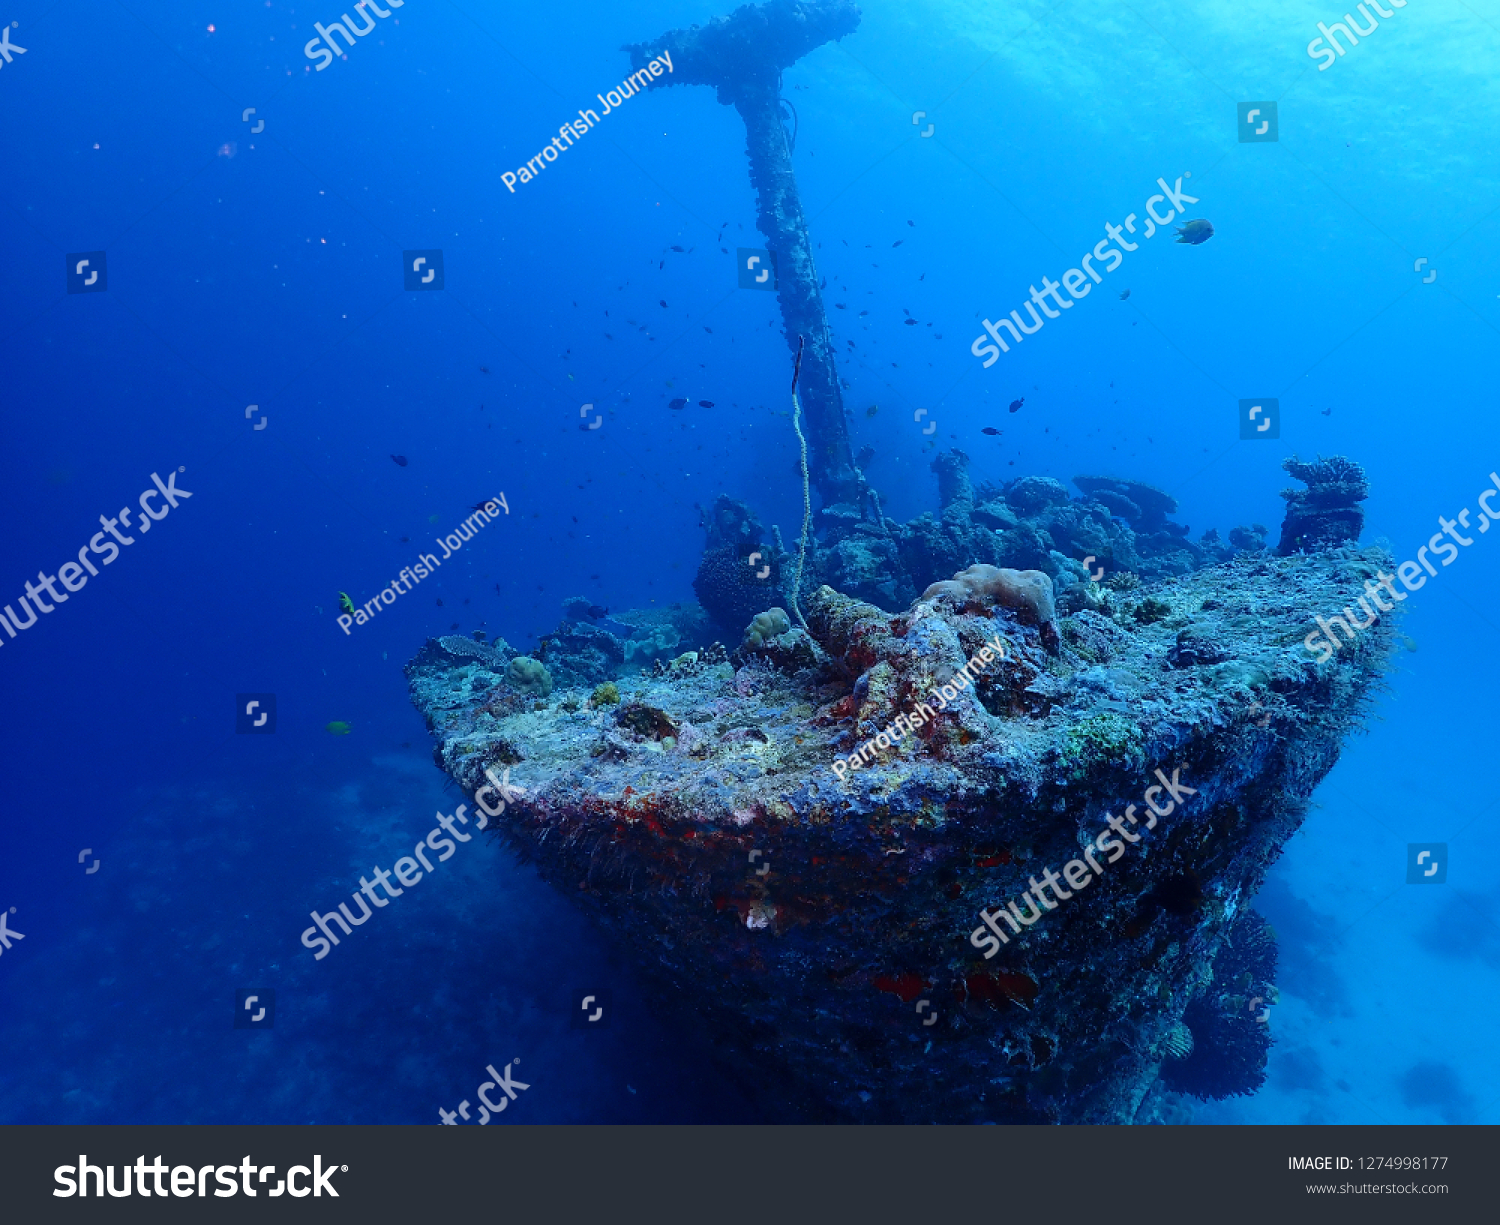 Scuba Diving Atun Wreck in Rabaul / Kokopo , East New Britain , Papau New Guinea . This wreck is located at Little Pigeon Island  #1274998177